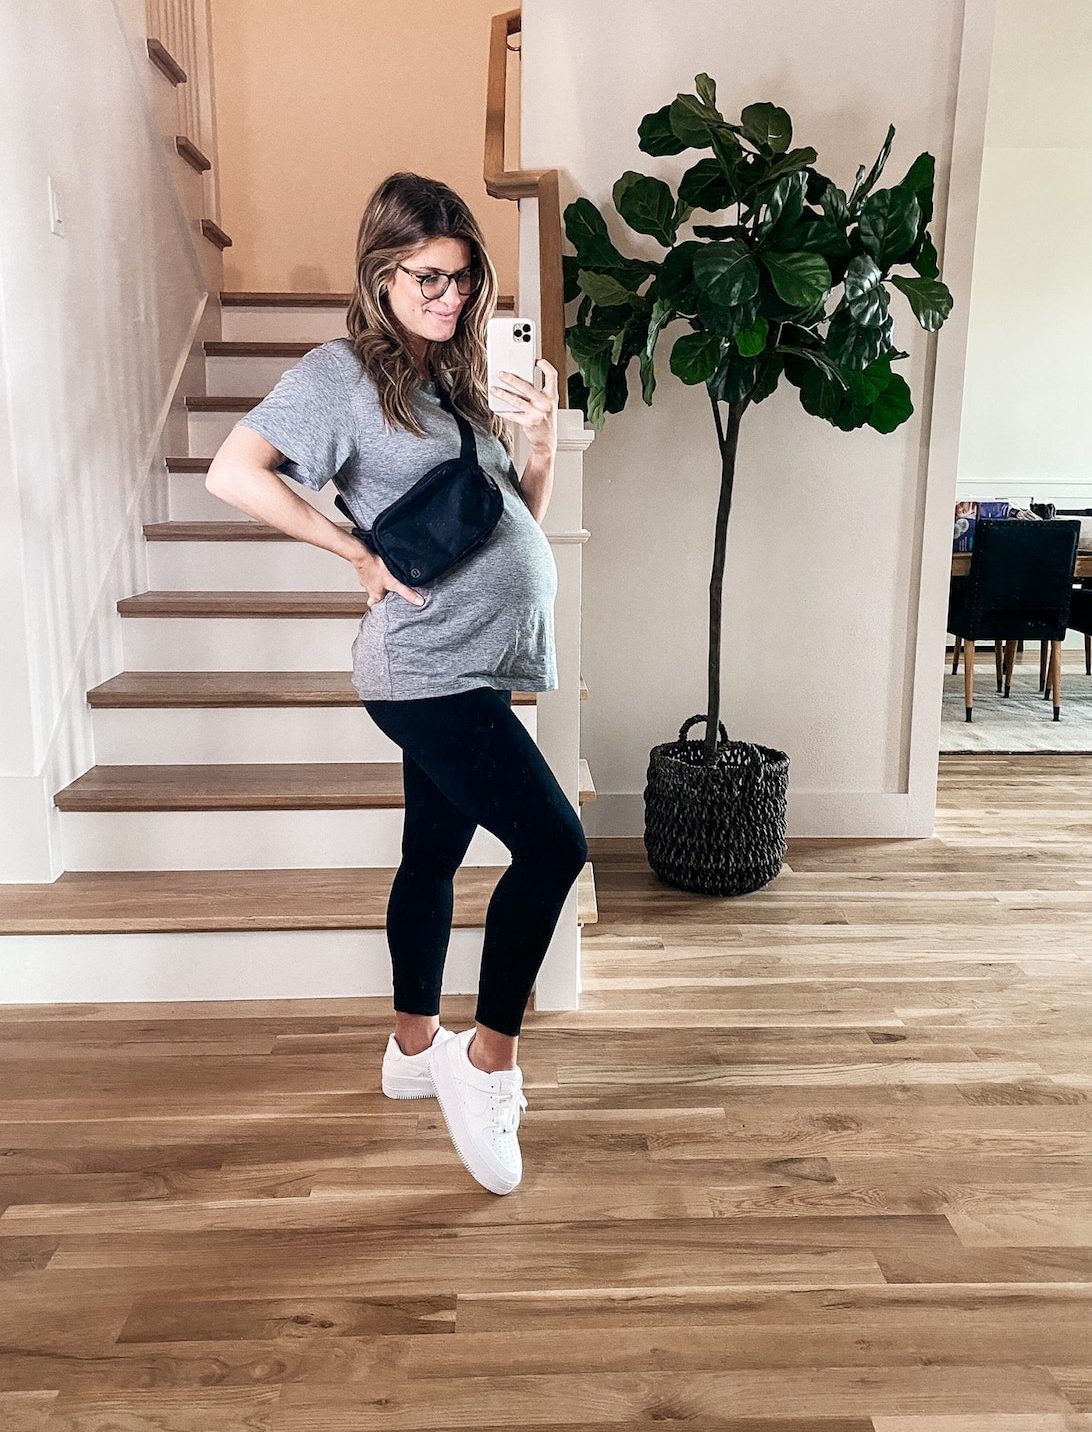 Brighton Butler wearing lulu lemon t-shirt with maternity leggings and Air Force 1's